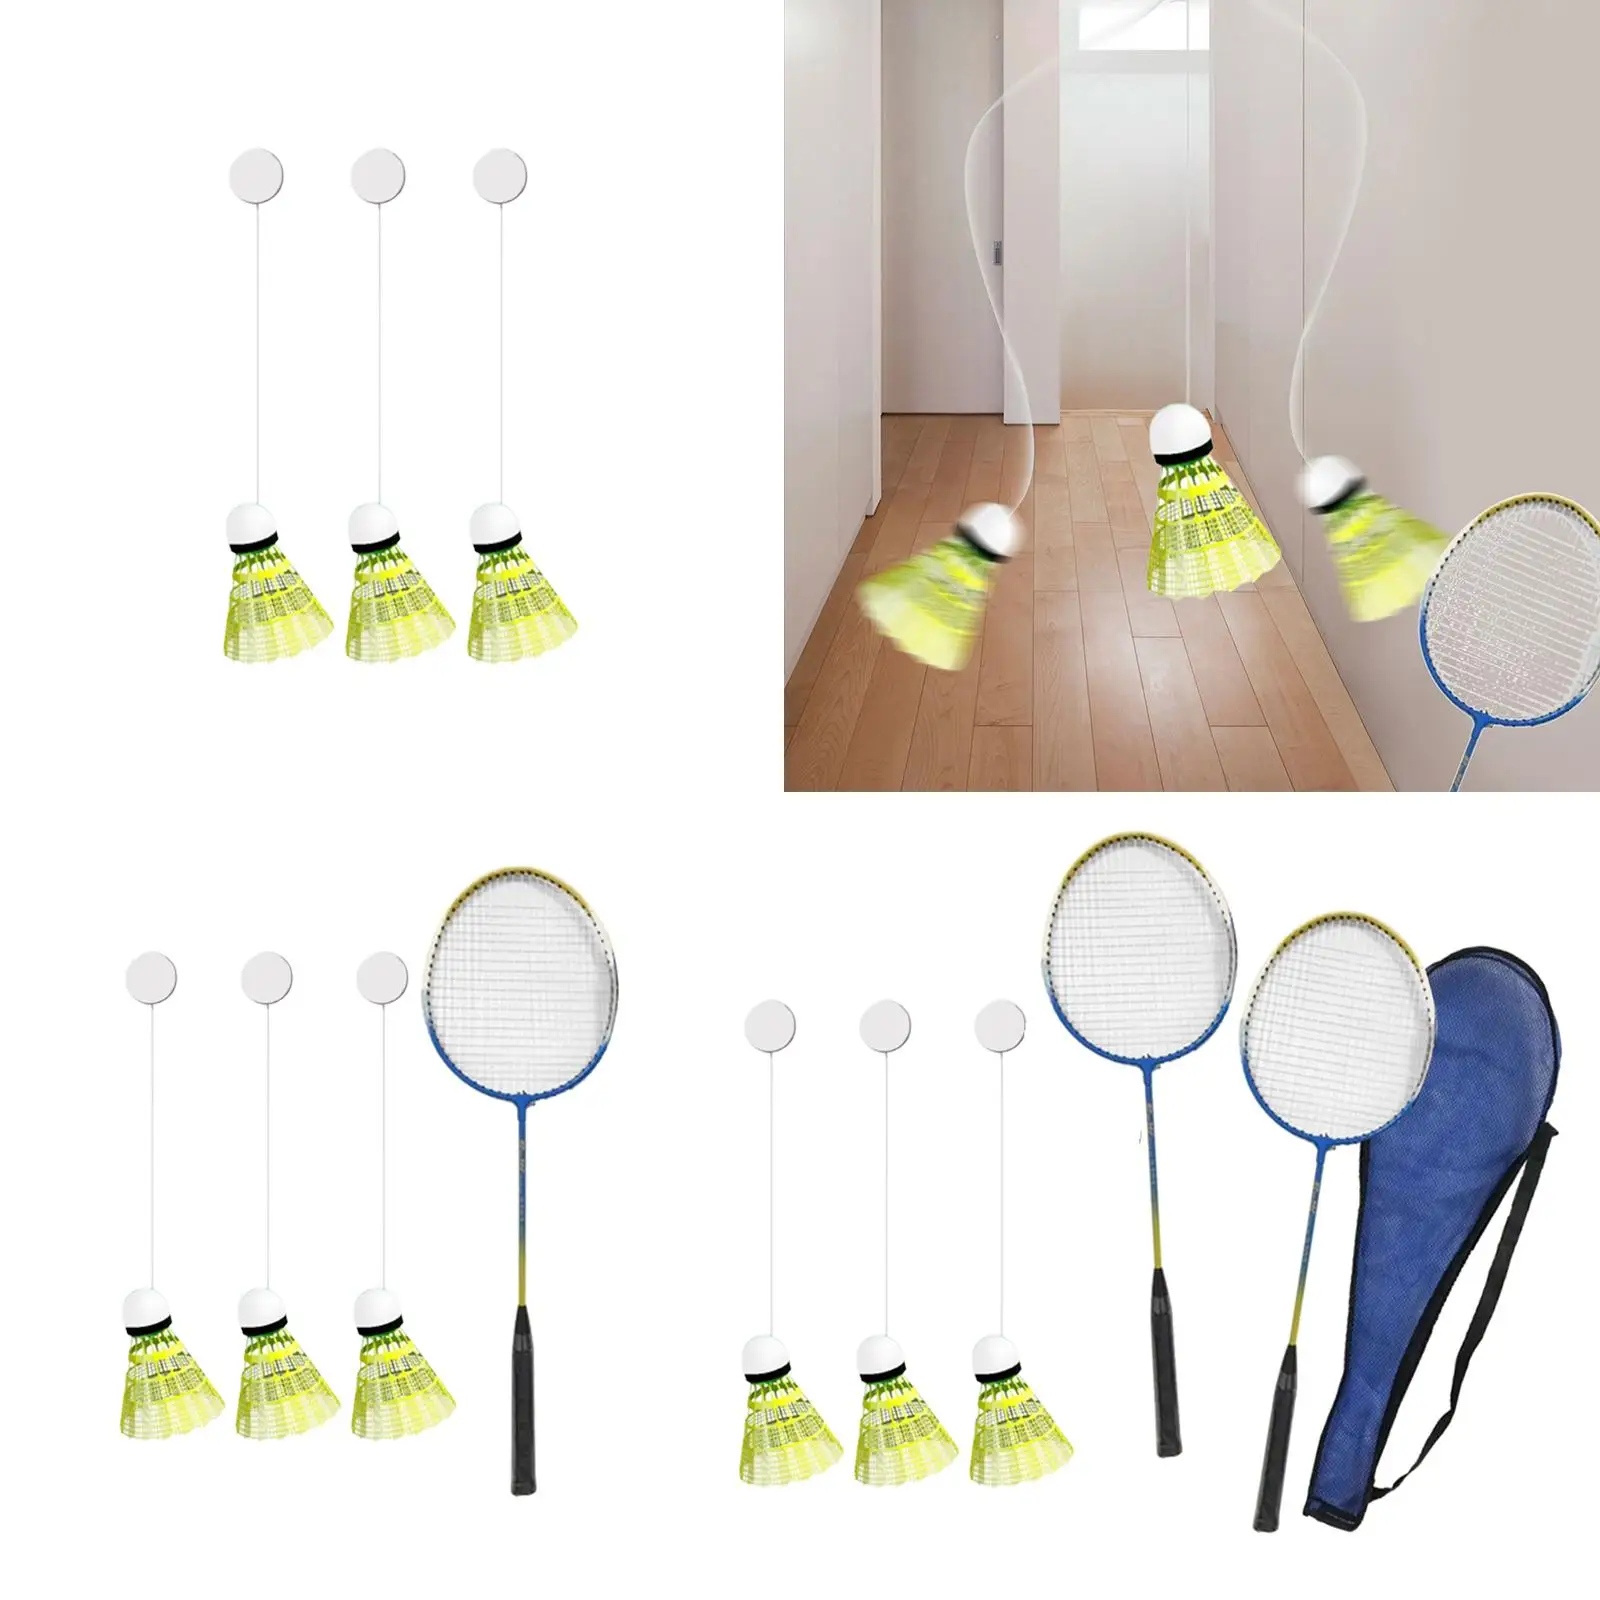 Badminton Solo Trainer Children Portable Beginner Adjustable with Badminton Shuttlecock for Games Sports Home Fitness Exercise